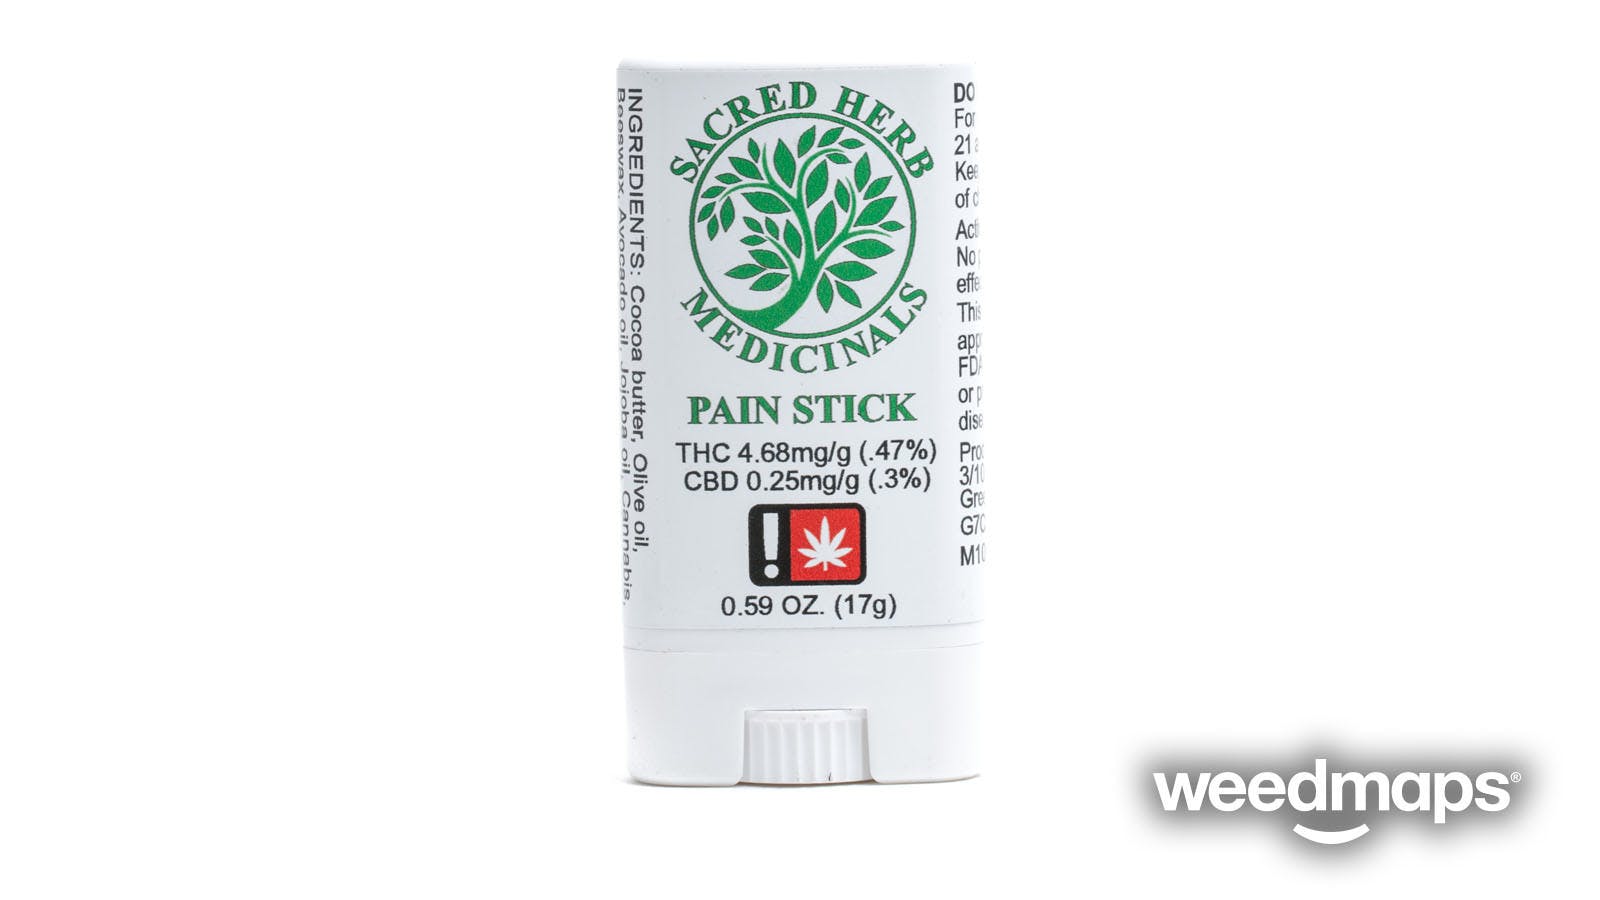 topicals-med-sacred-herbs-medicinals-pain-stick